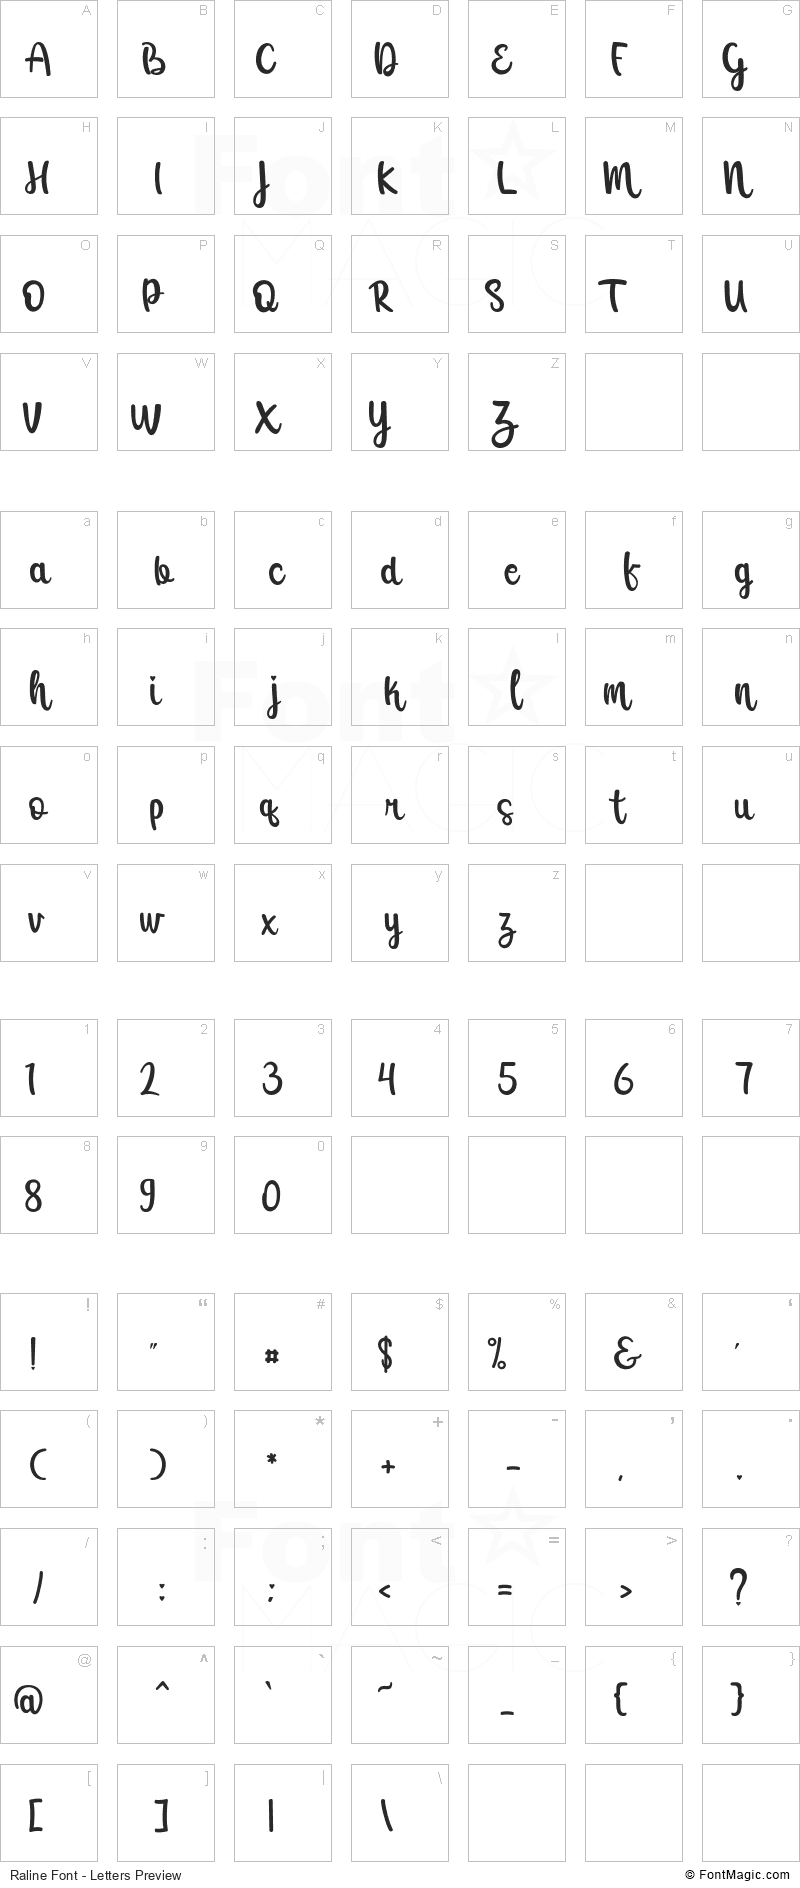 Raline Font - All Latters Preview Chart